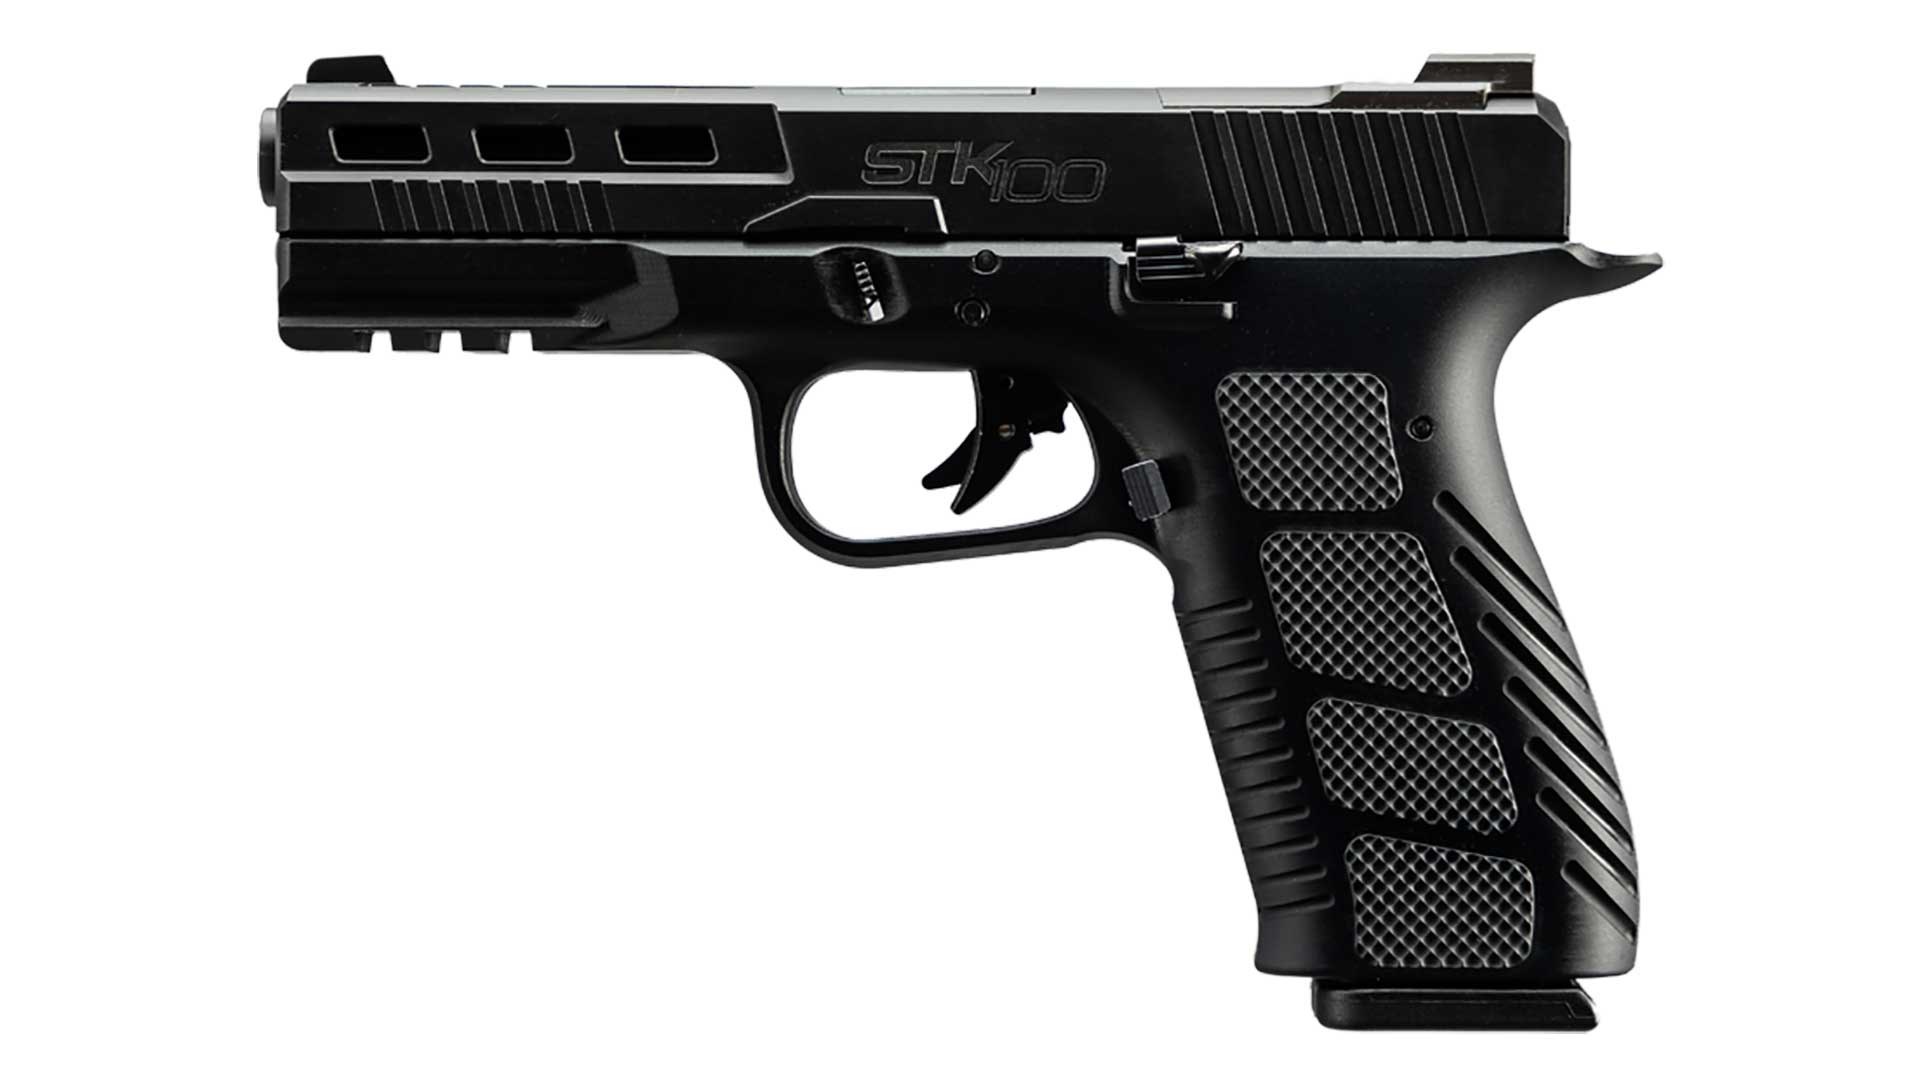 Rock Island Armory STK100 left side shown on white.